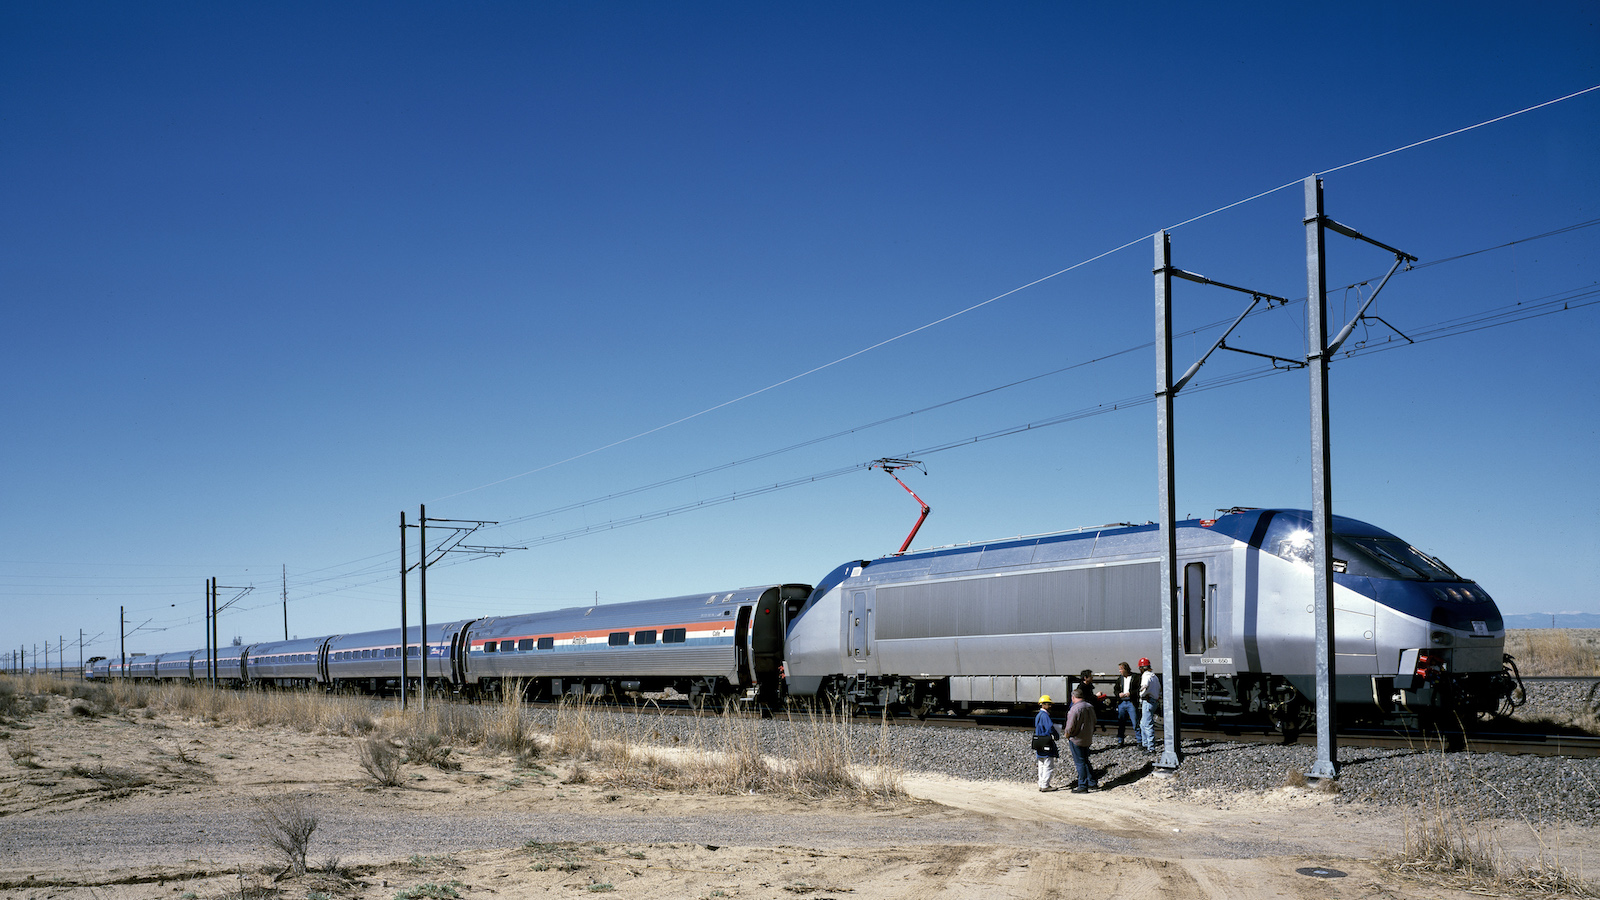 Amtrak new Acela Express trainset, left, at its test site in Pueblo, Colorado, prior to its introduc